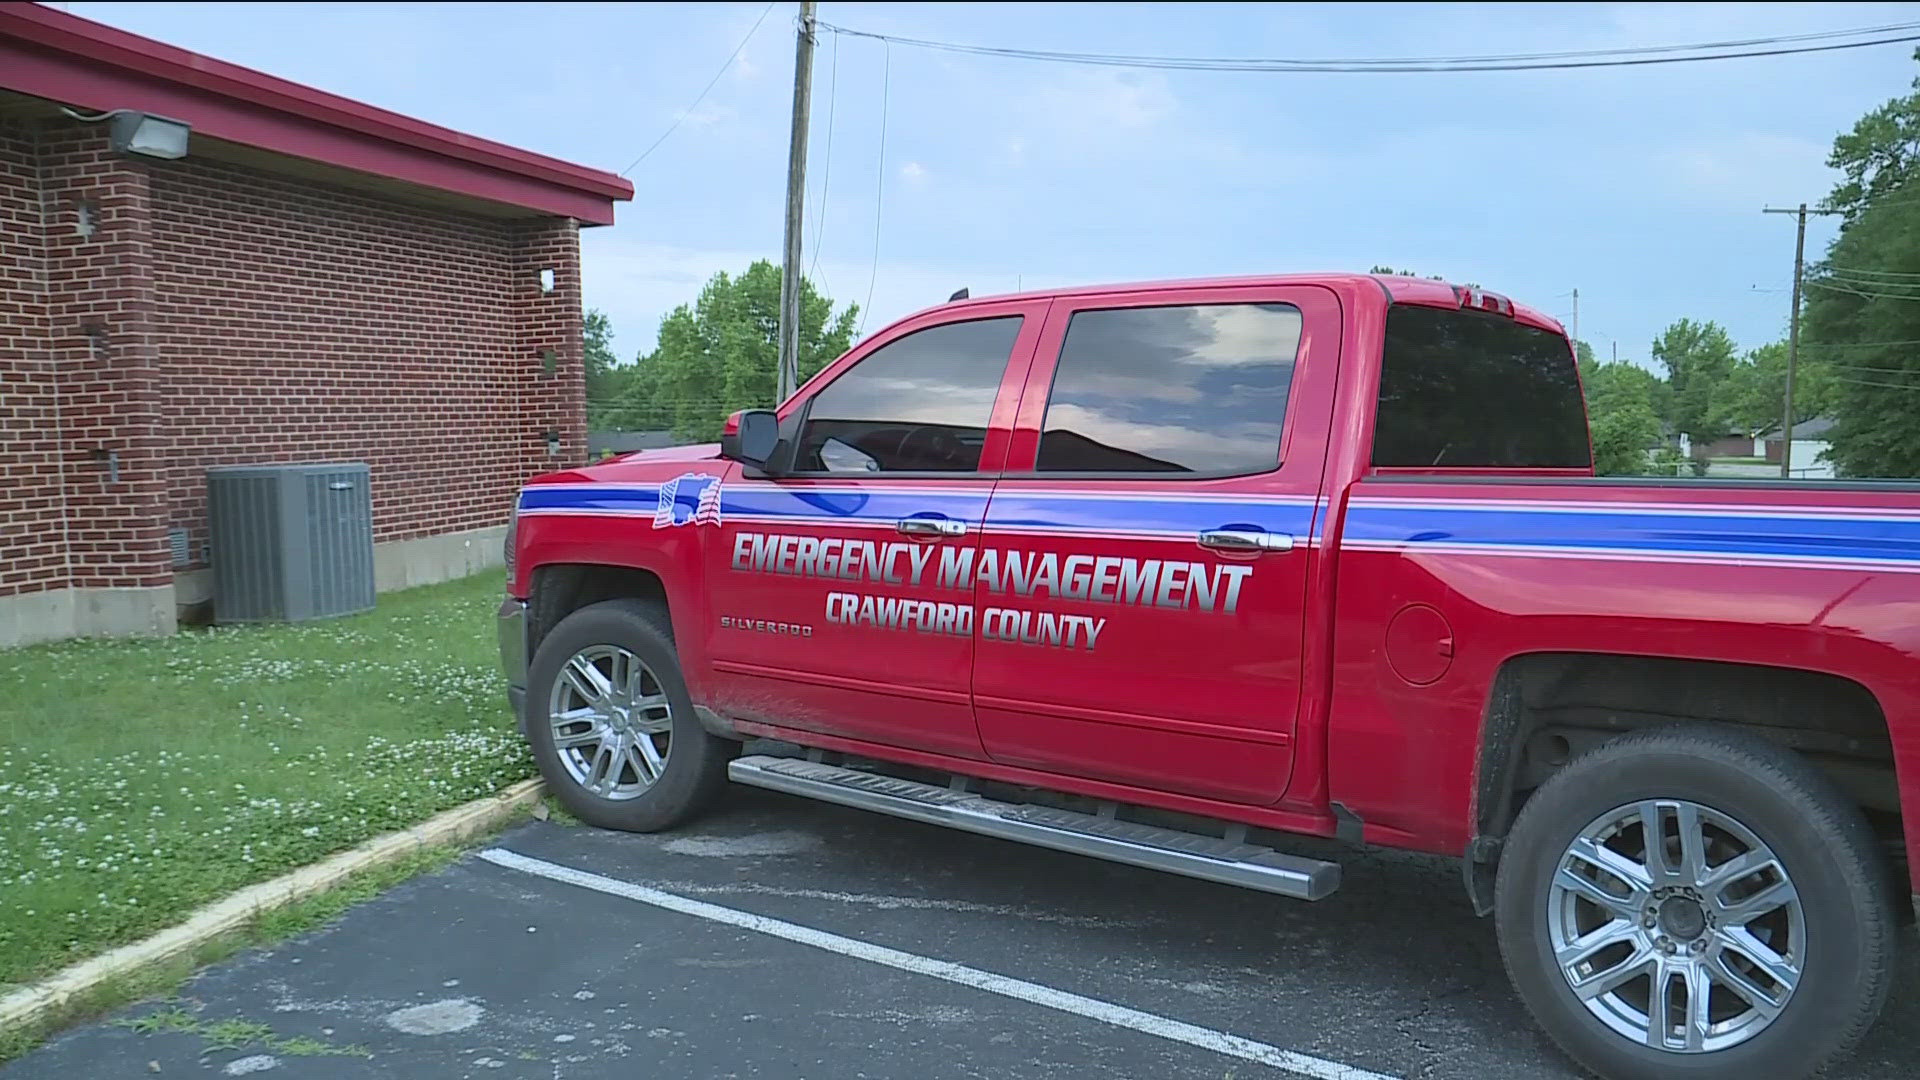 "We'll be here 24 hours a day, as long as weather is in our area," Crawford County Emergency Management Director Veronica Robins said.